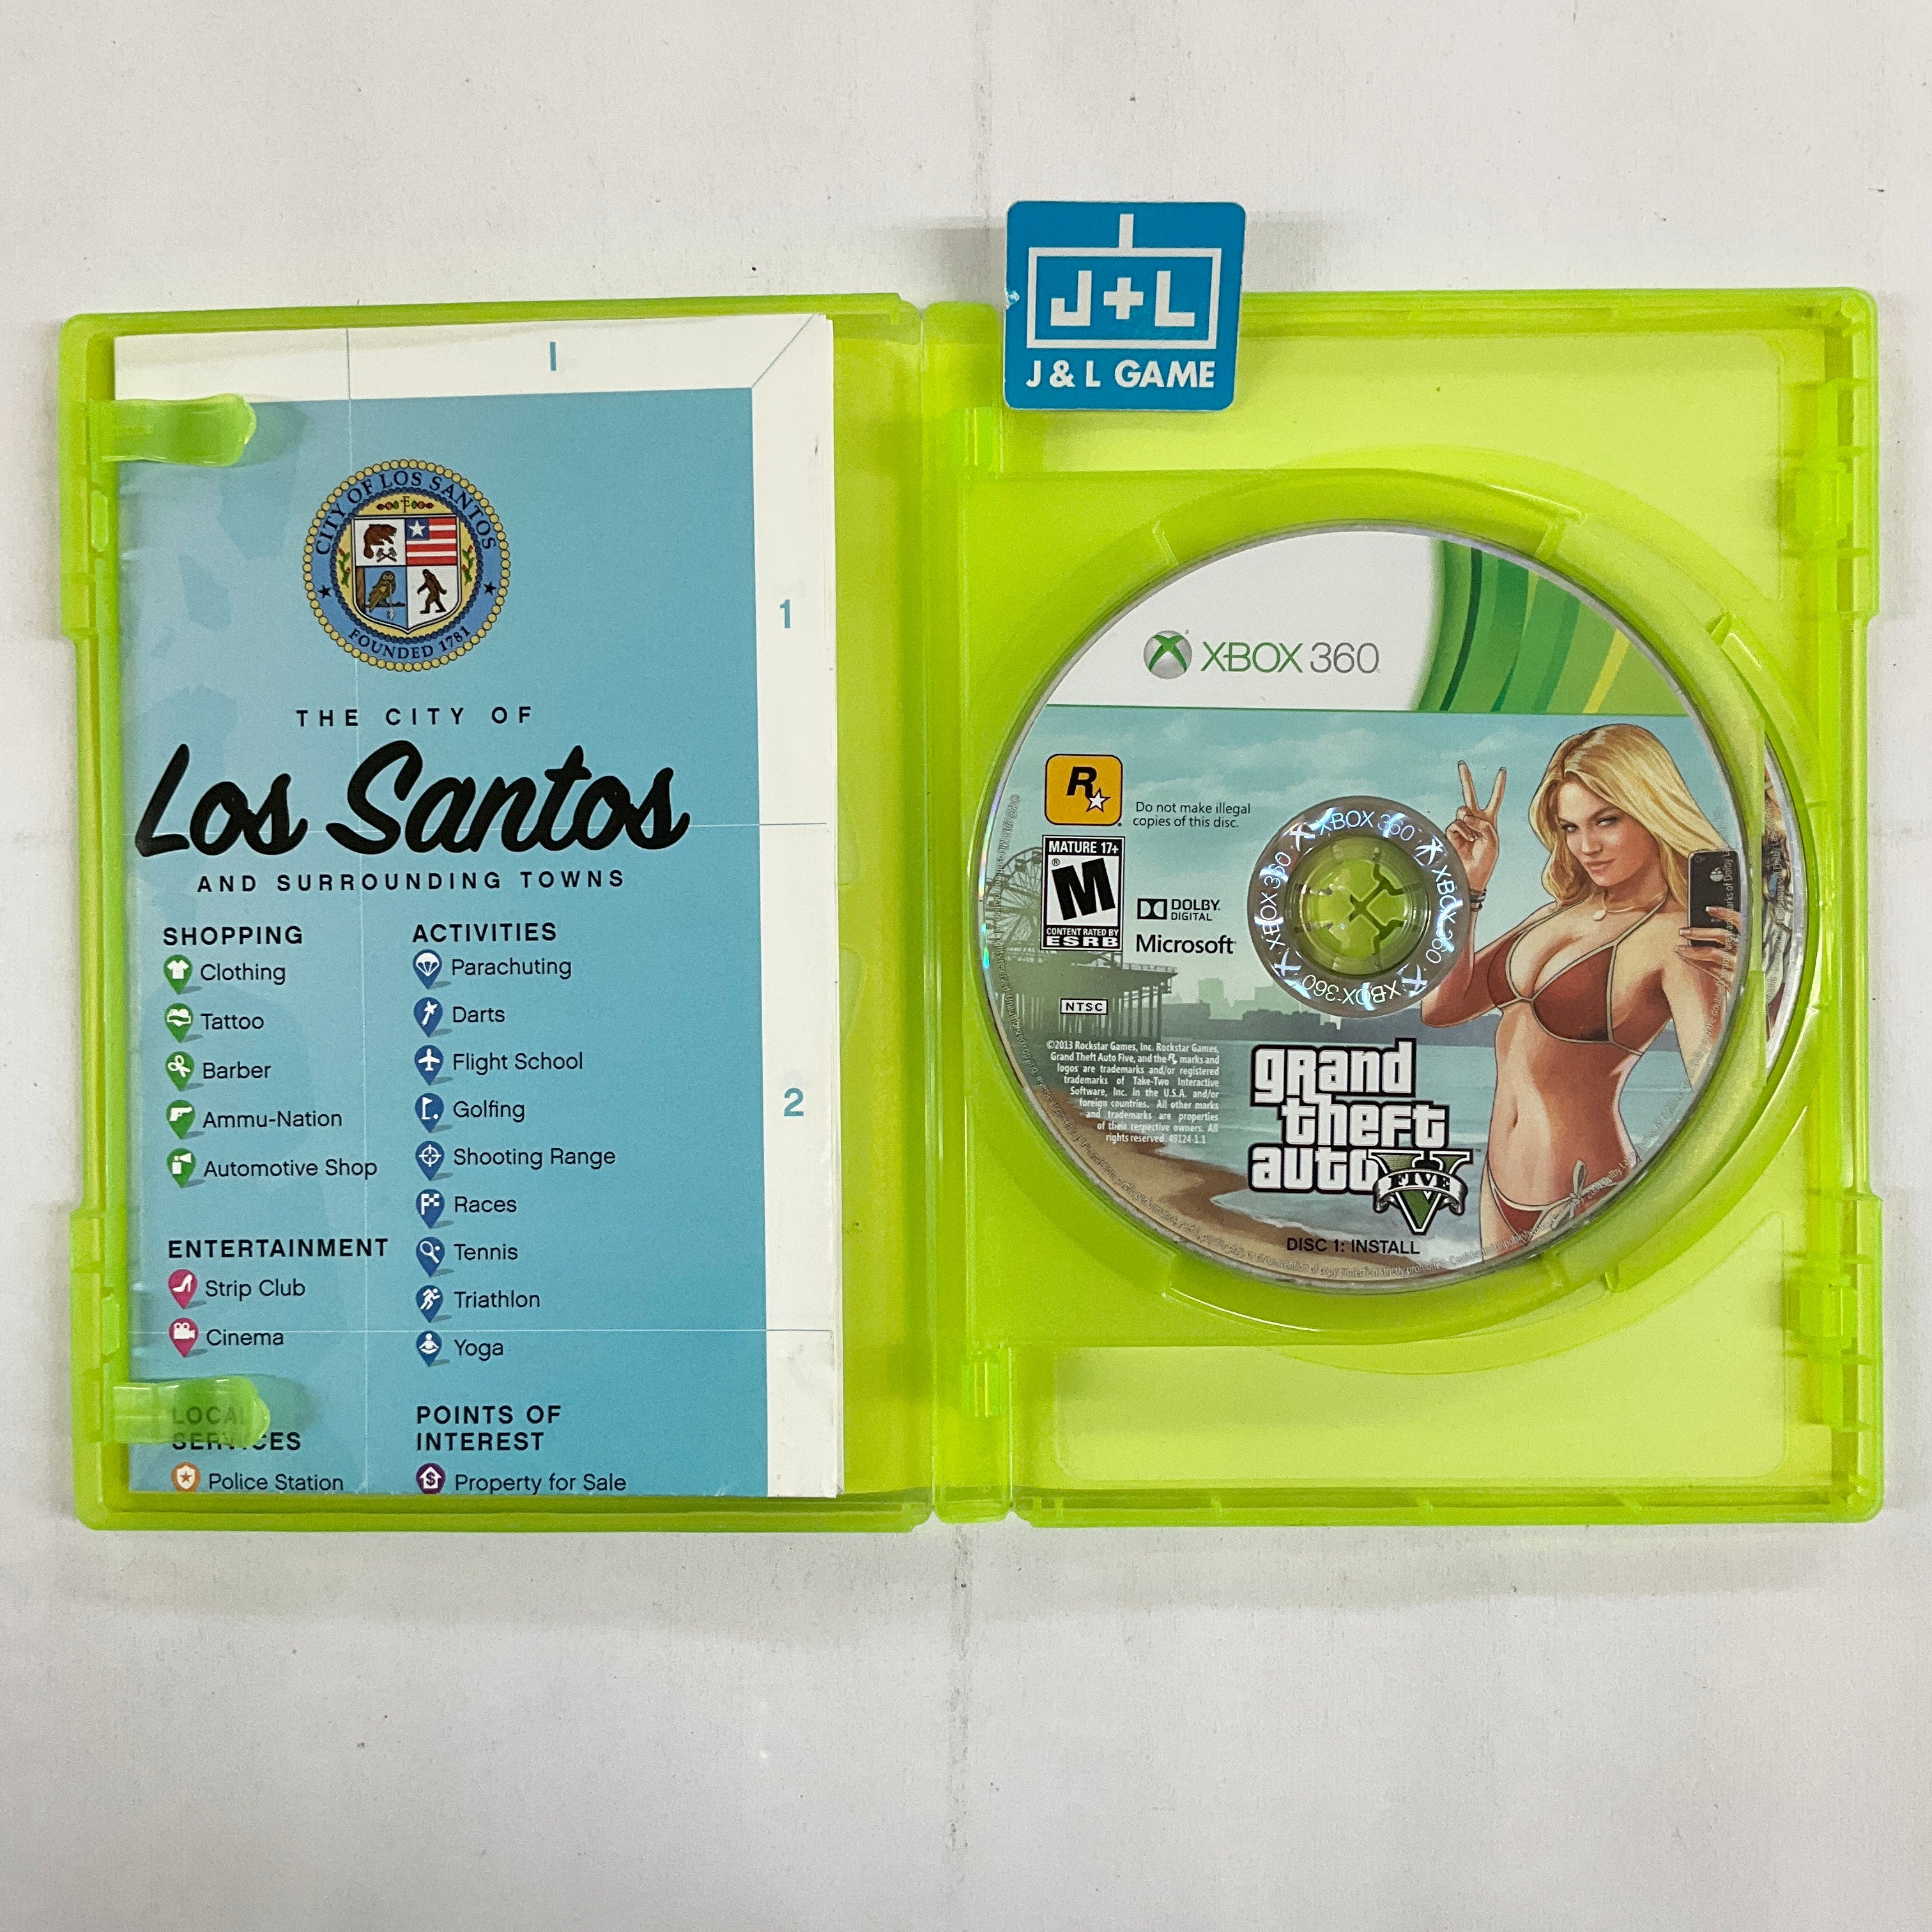 Grand Theft Auto V - Xbox 360 [Pre-Owned] Video Games Rockstar Games   